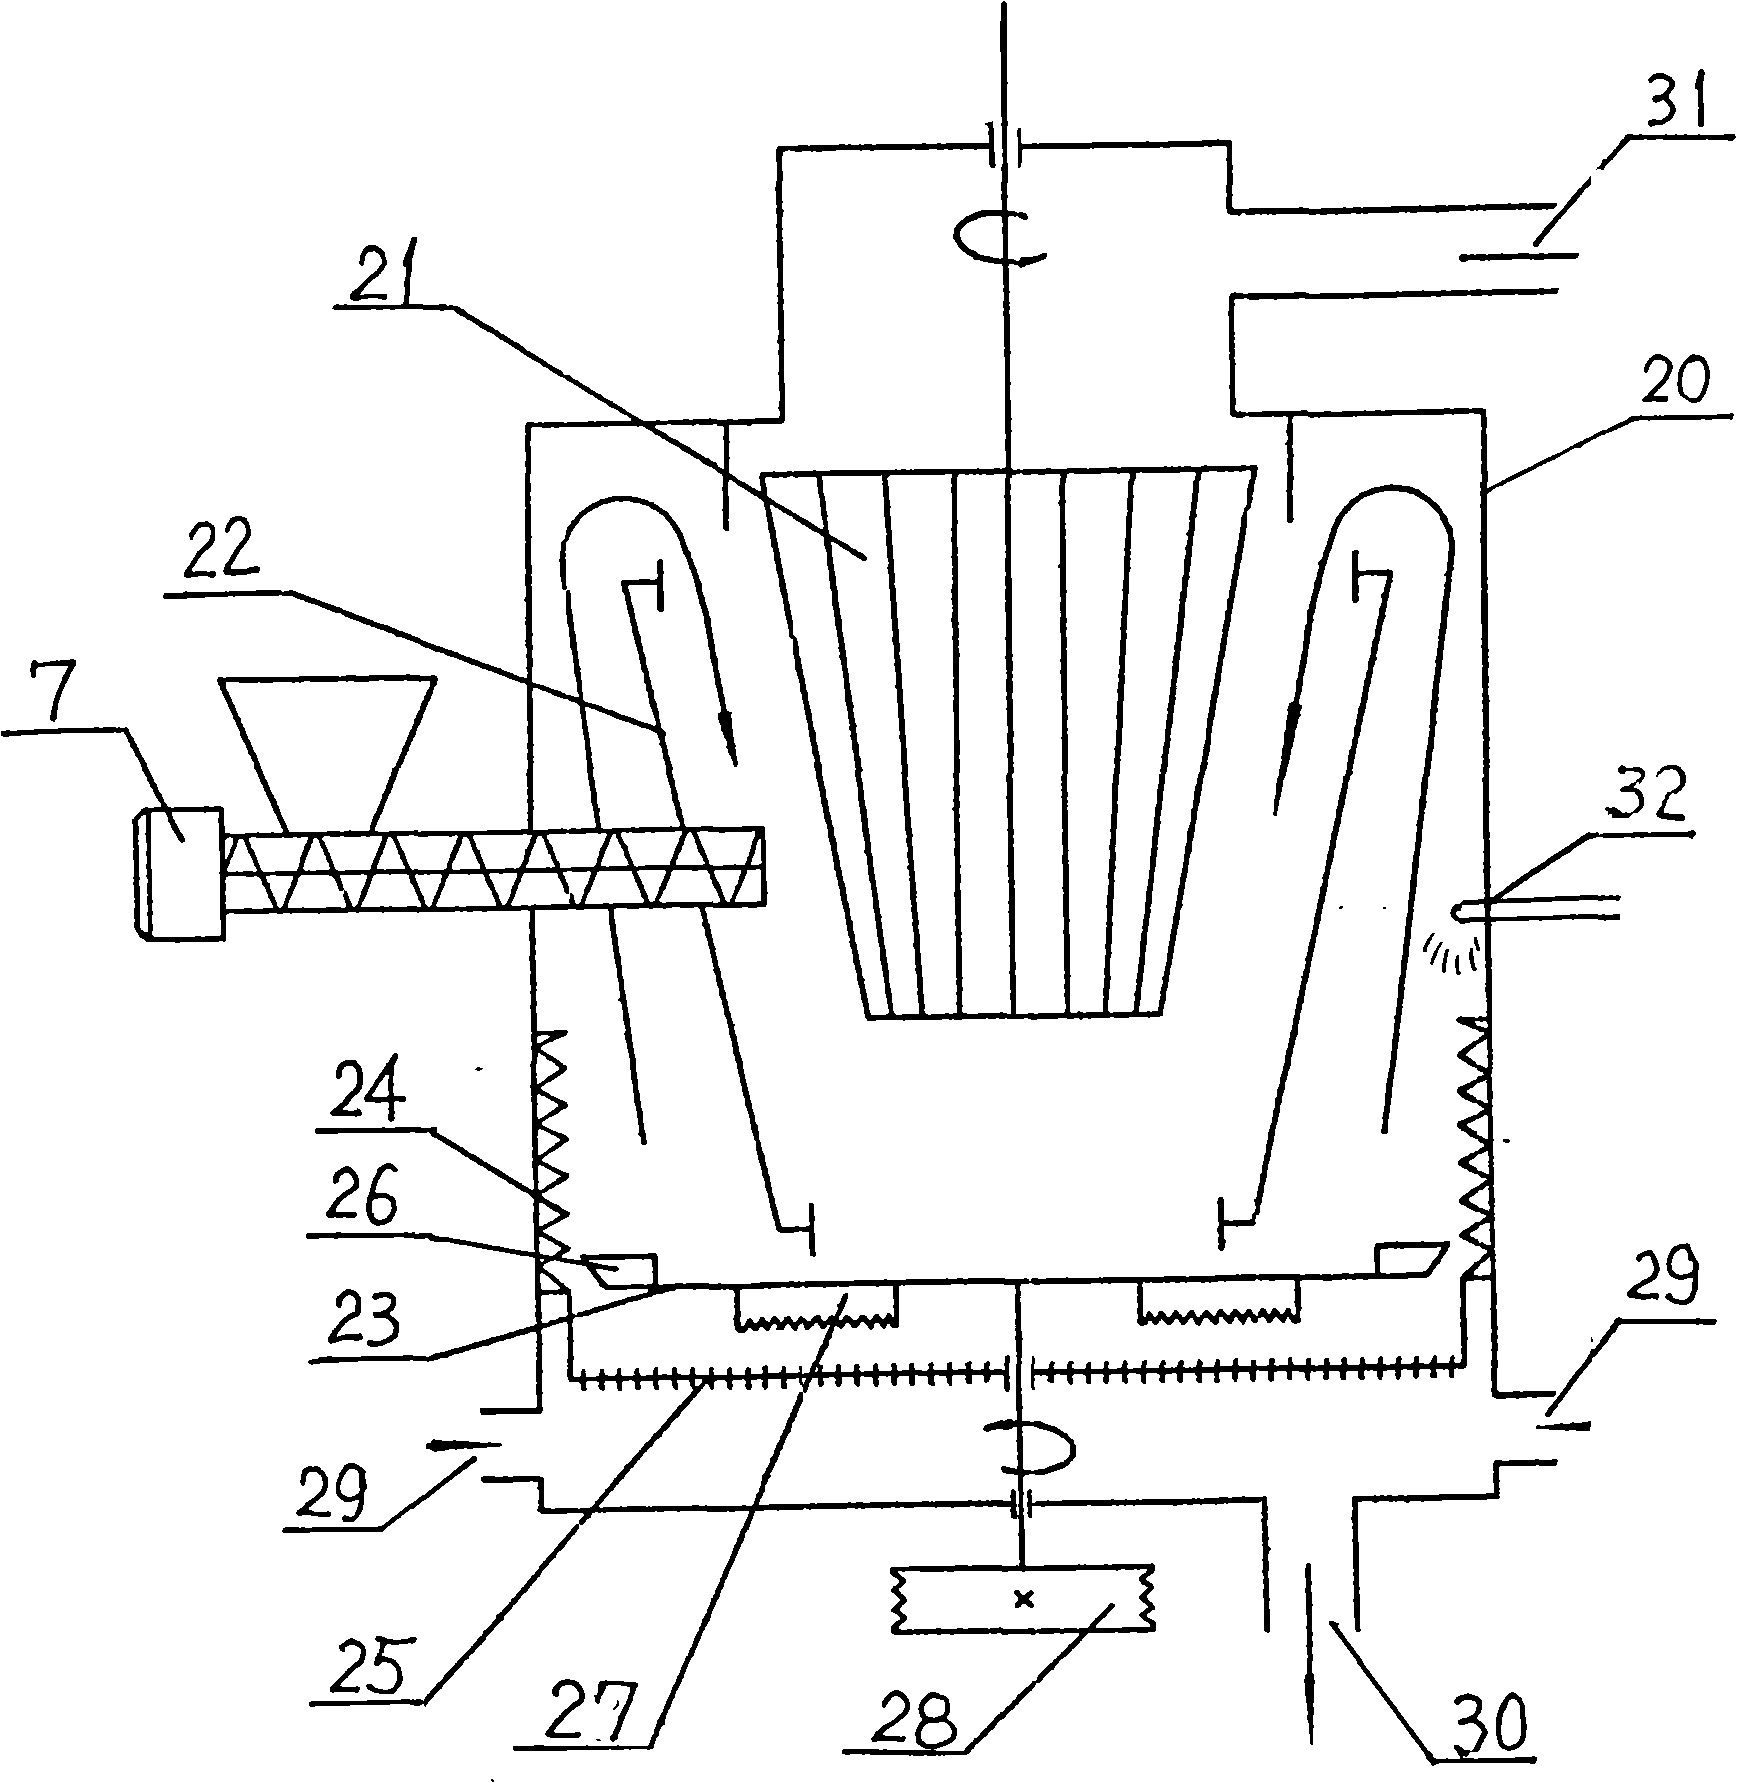 Novel crushing and separating technique for metal and non-metal in composite material